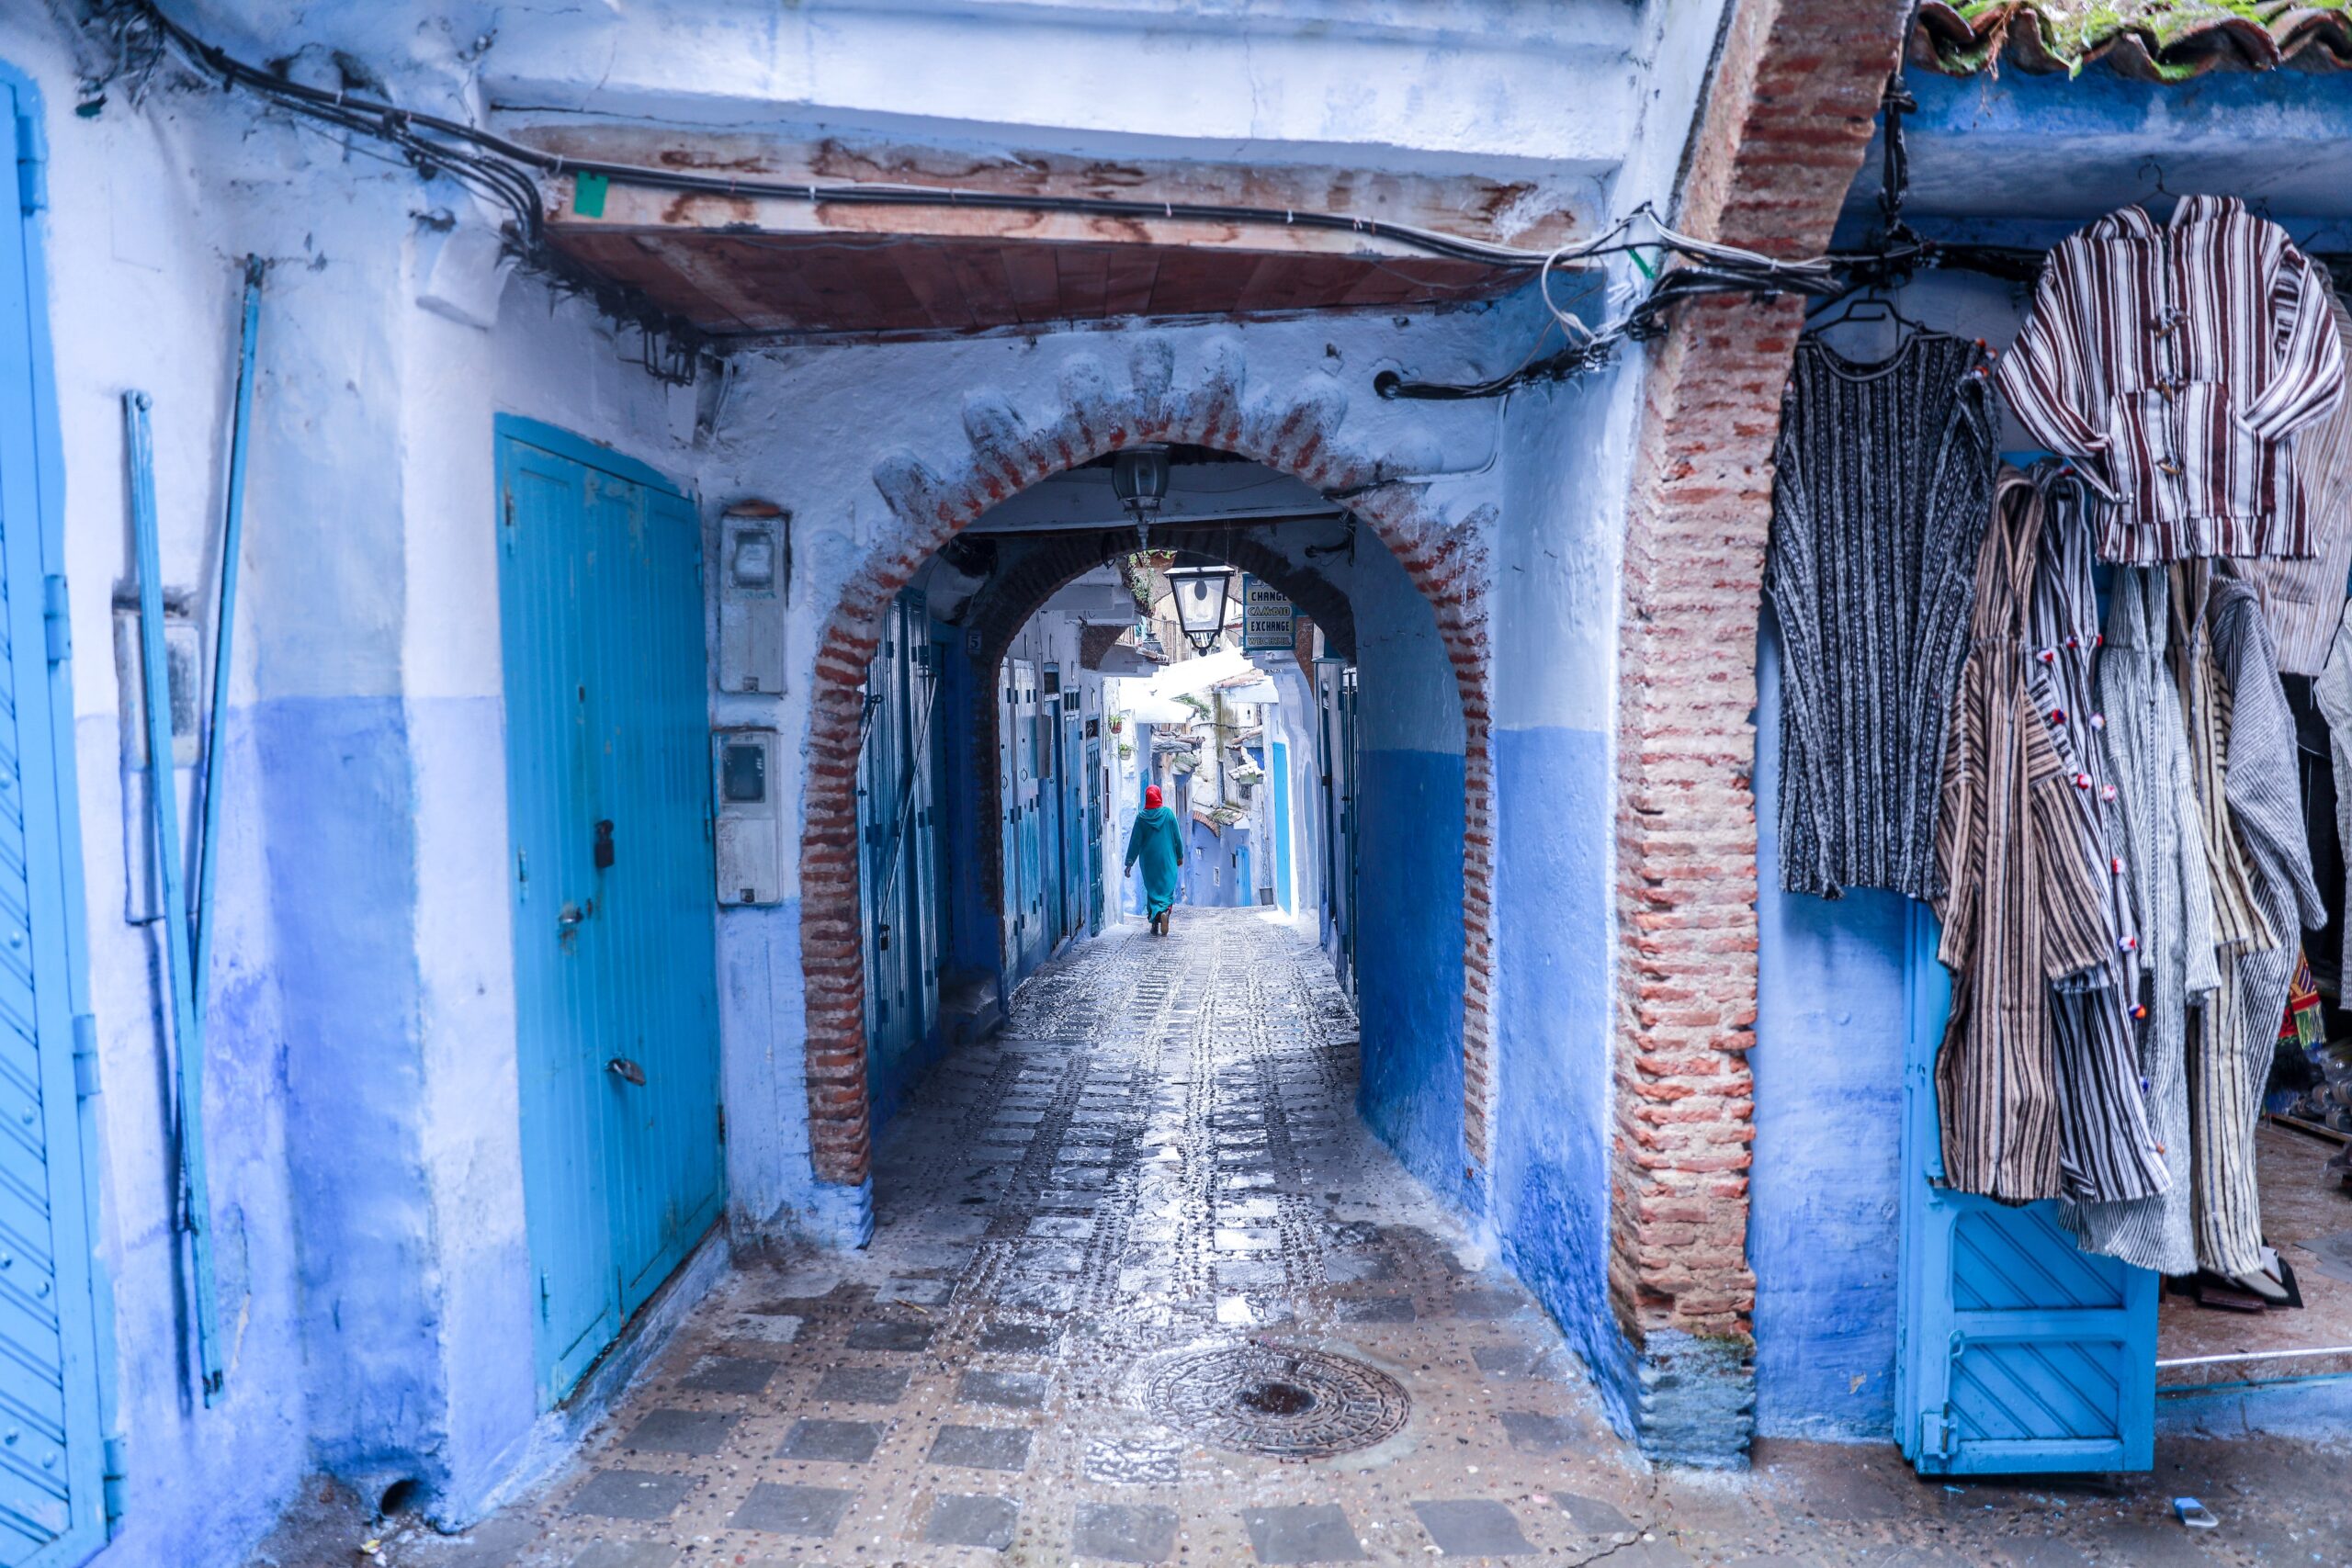 Our Chefchaouen Private Tour From Tangier